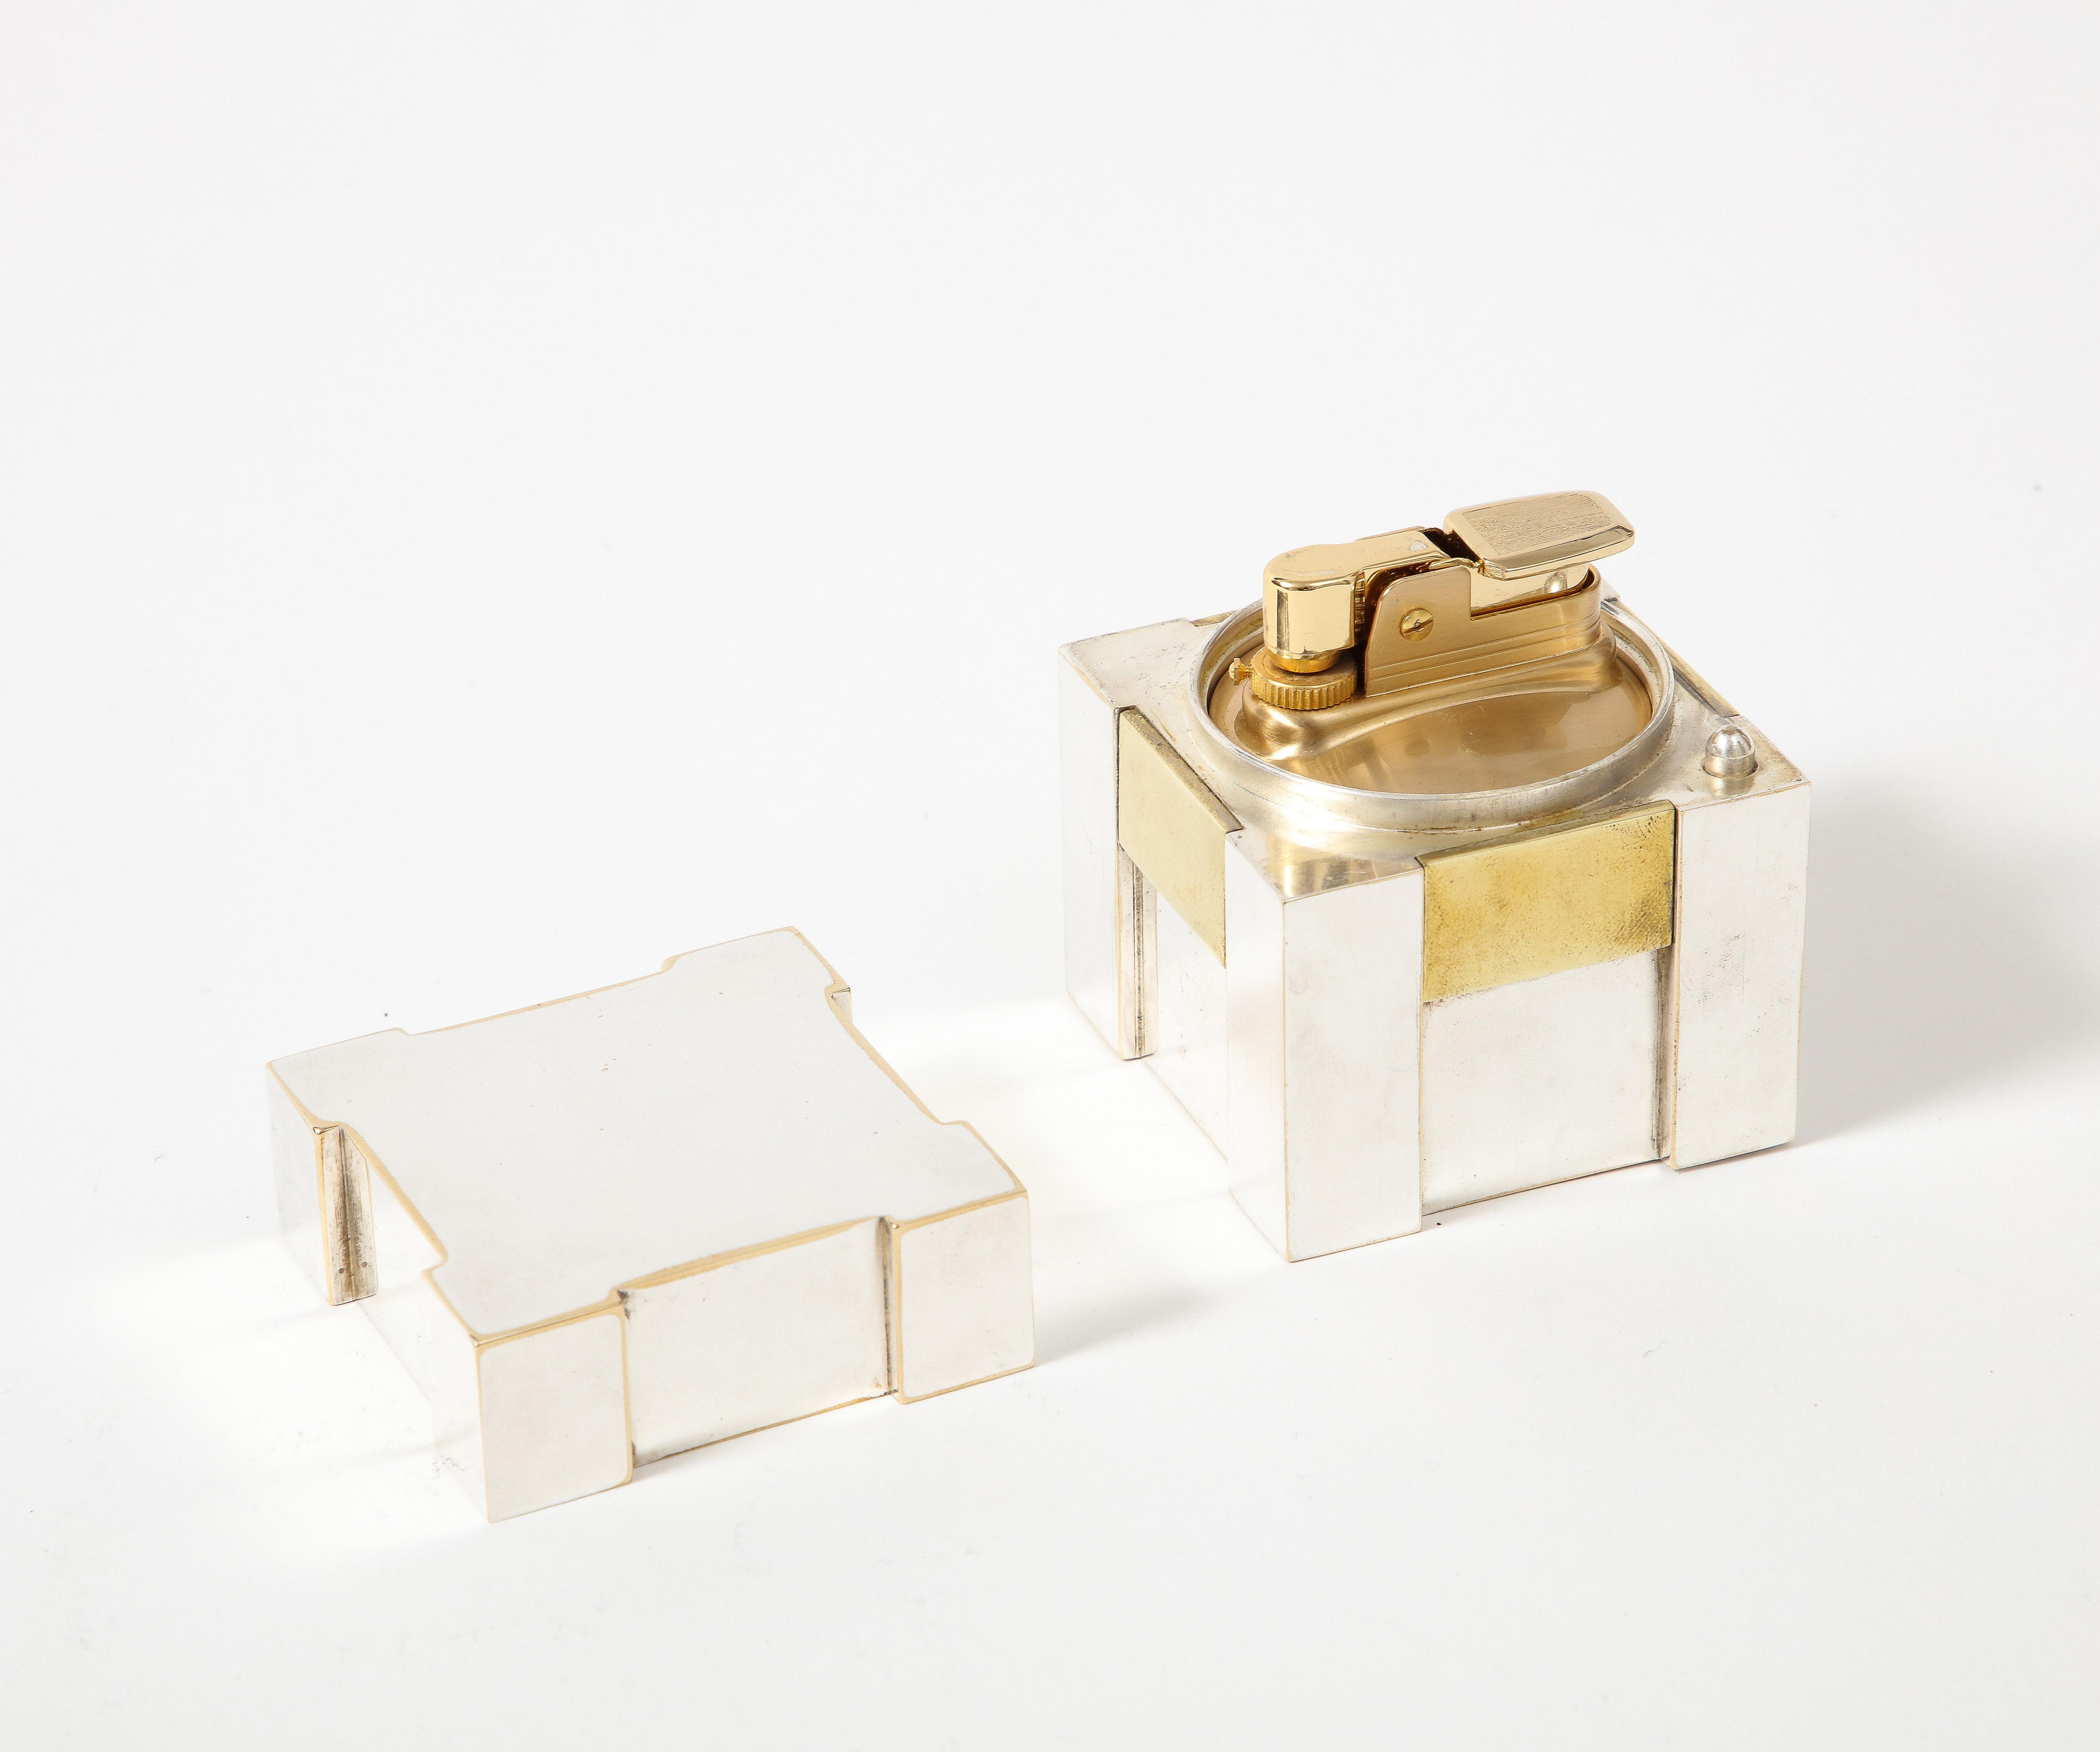 Silver and Brass Lighter, Hermes, Italy, c. 1970 For Sale 2